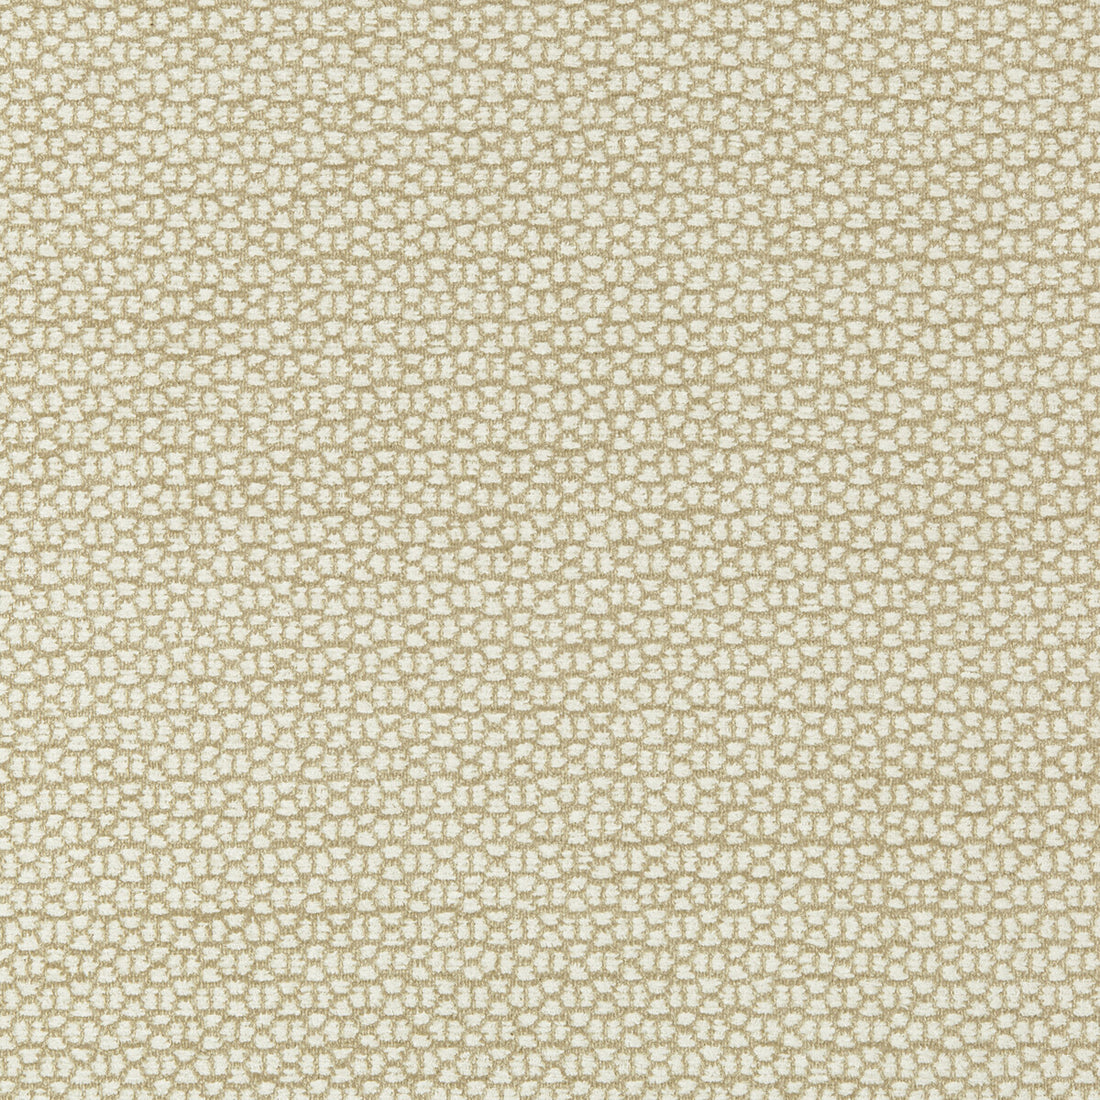 Marolay Texture fabric in beige color - pattern 8019144.116.0 - by Brunschwig &amp; Fils in the Chambery Textures II collection